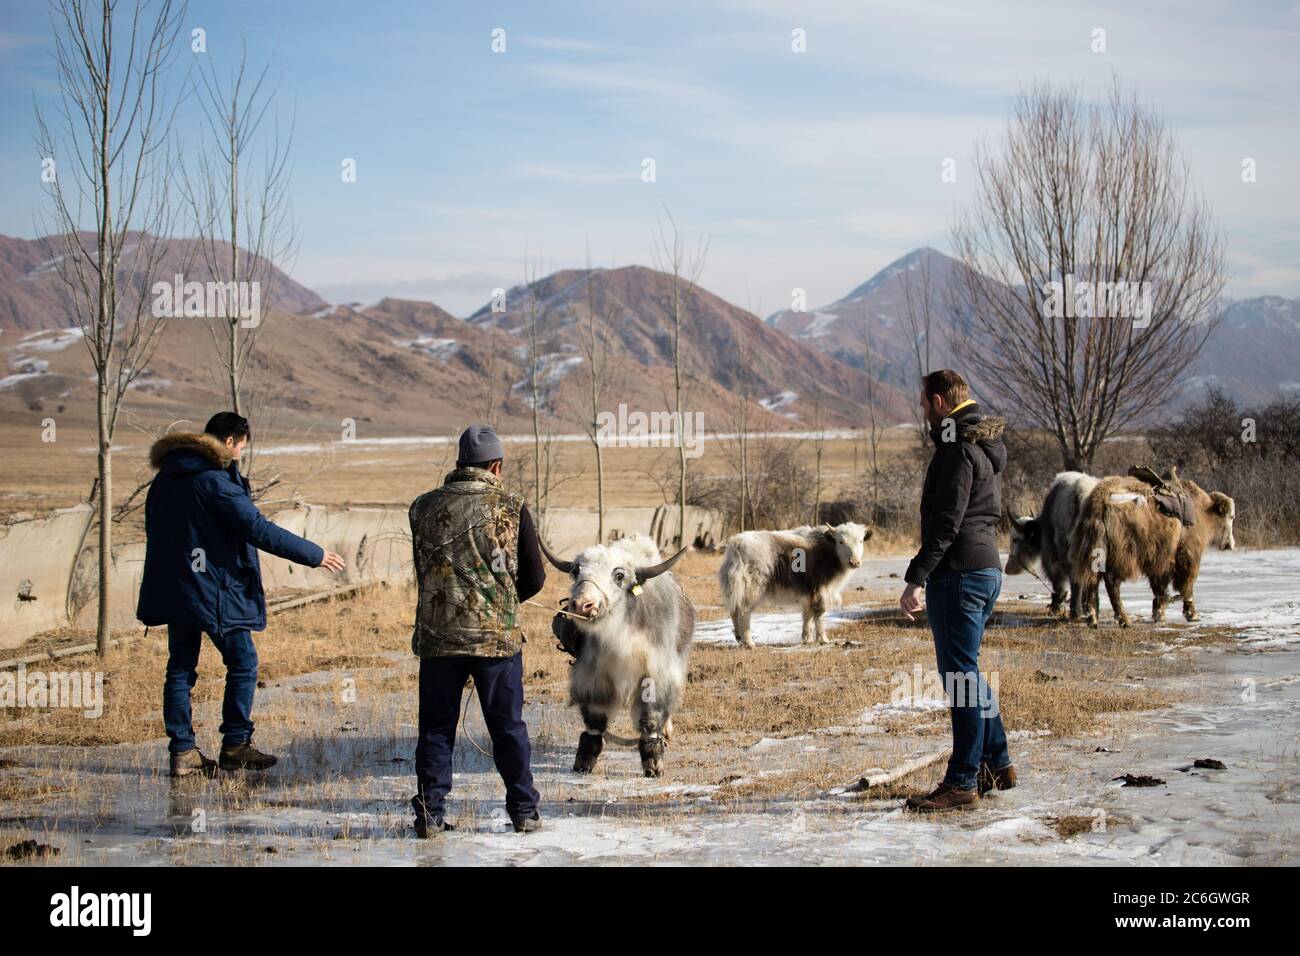 Scenes from Jiachy Yurt Camp on the South Shore of Issyk Kol in Kyrgyzstan. Stock Photo